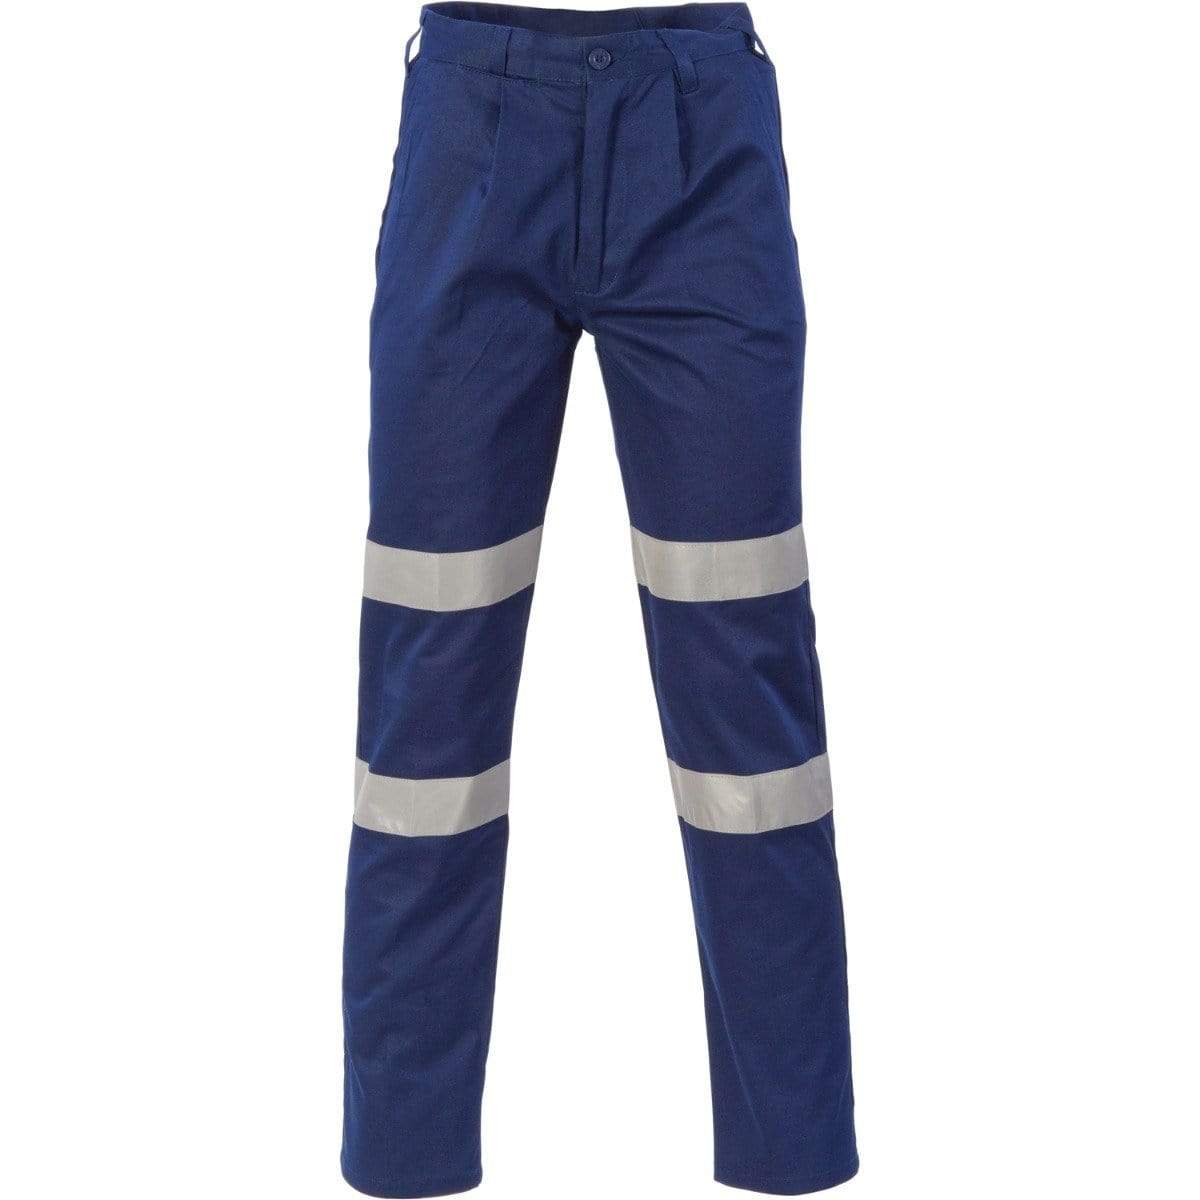 Dnc Workwear Middle Weight Double Hoops Taped Pants - 3354 Work Wear DNC Workwear Navy 72R 